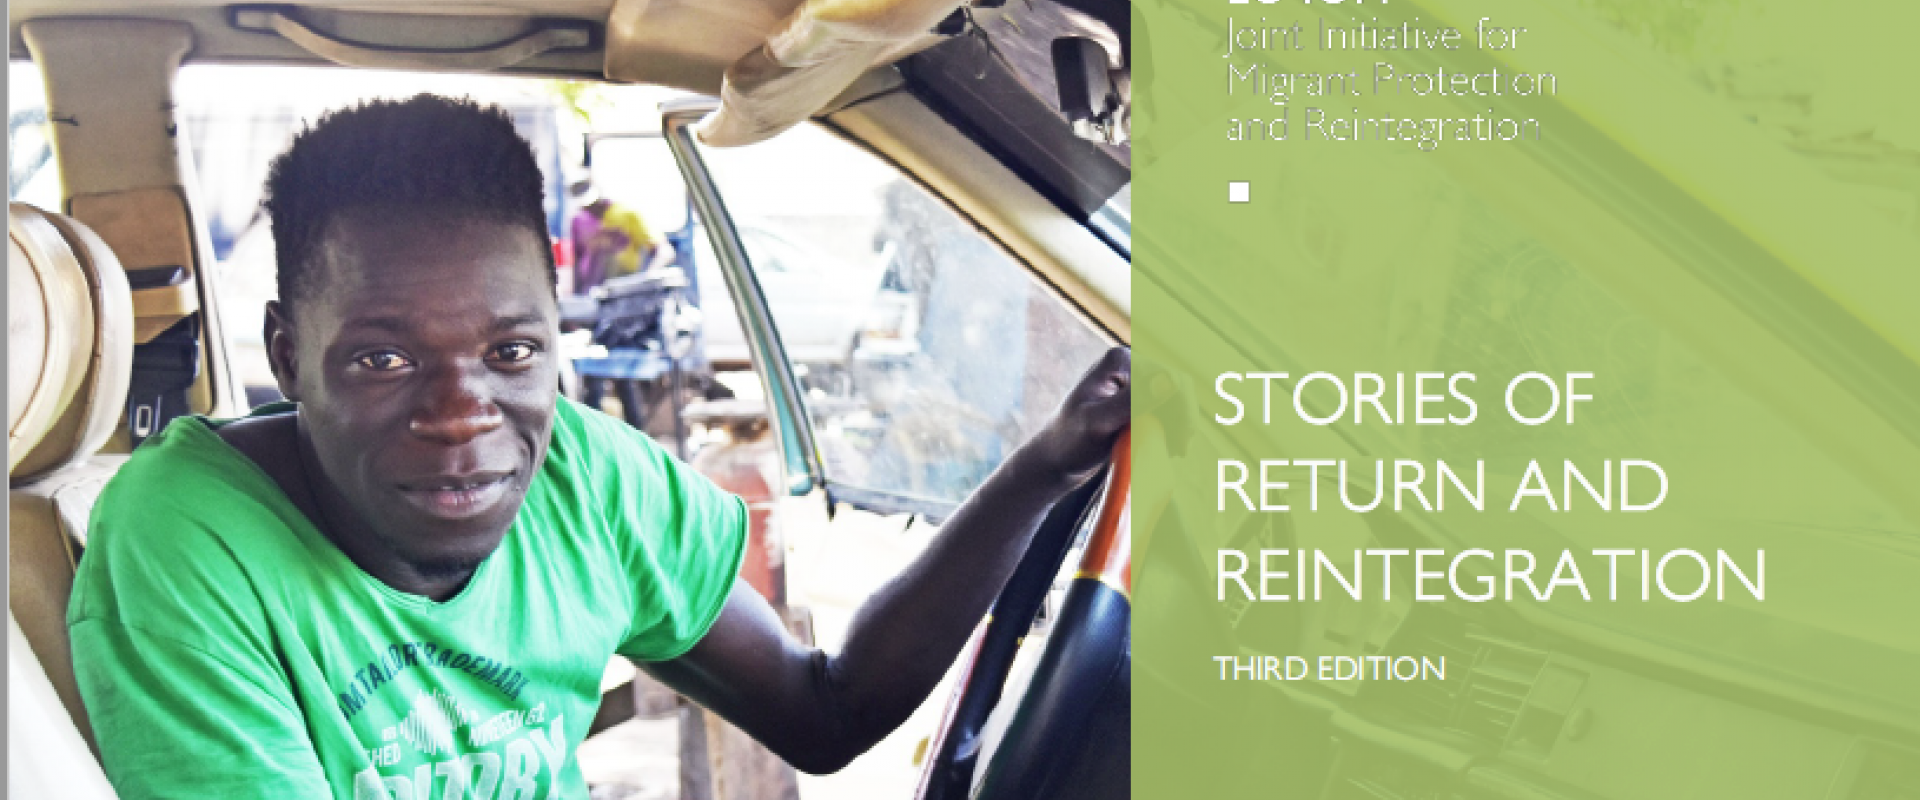 Stories of Return and Reintegration - The Gambia (3rd Edition)